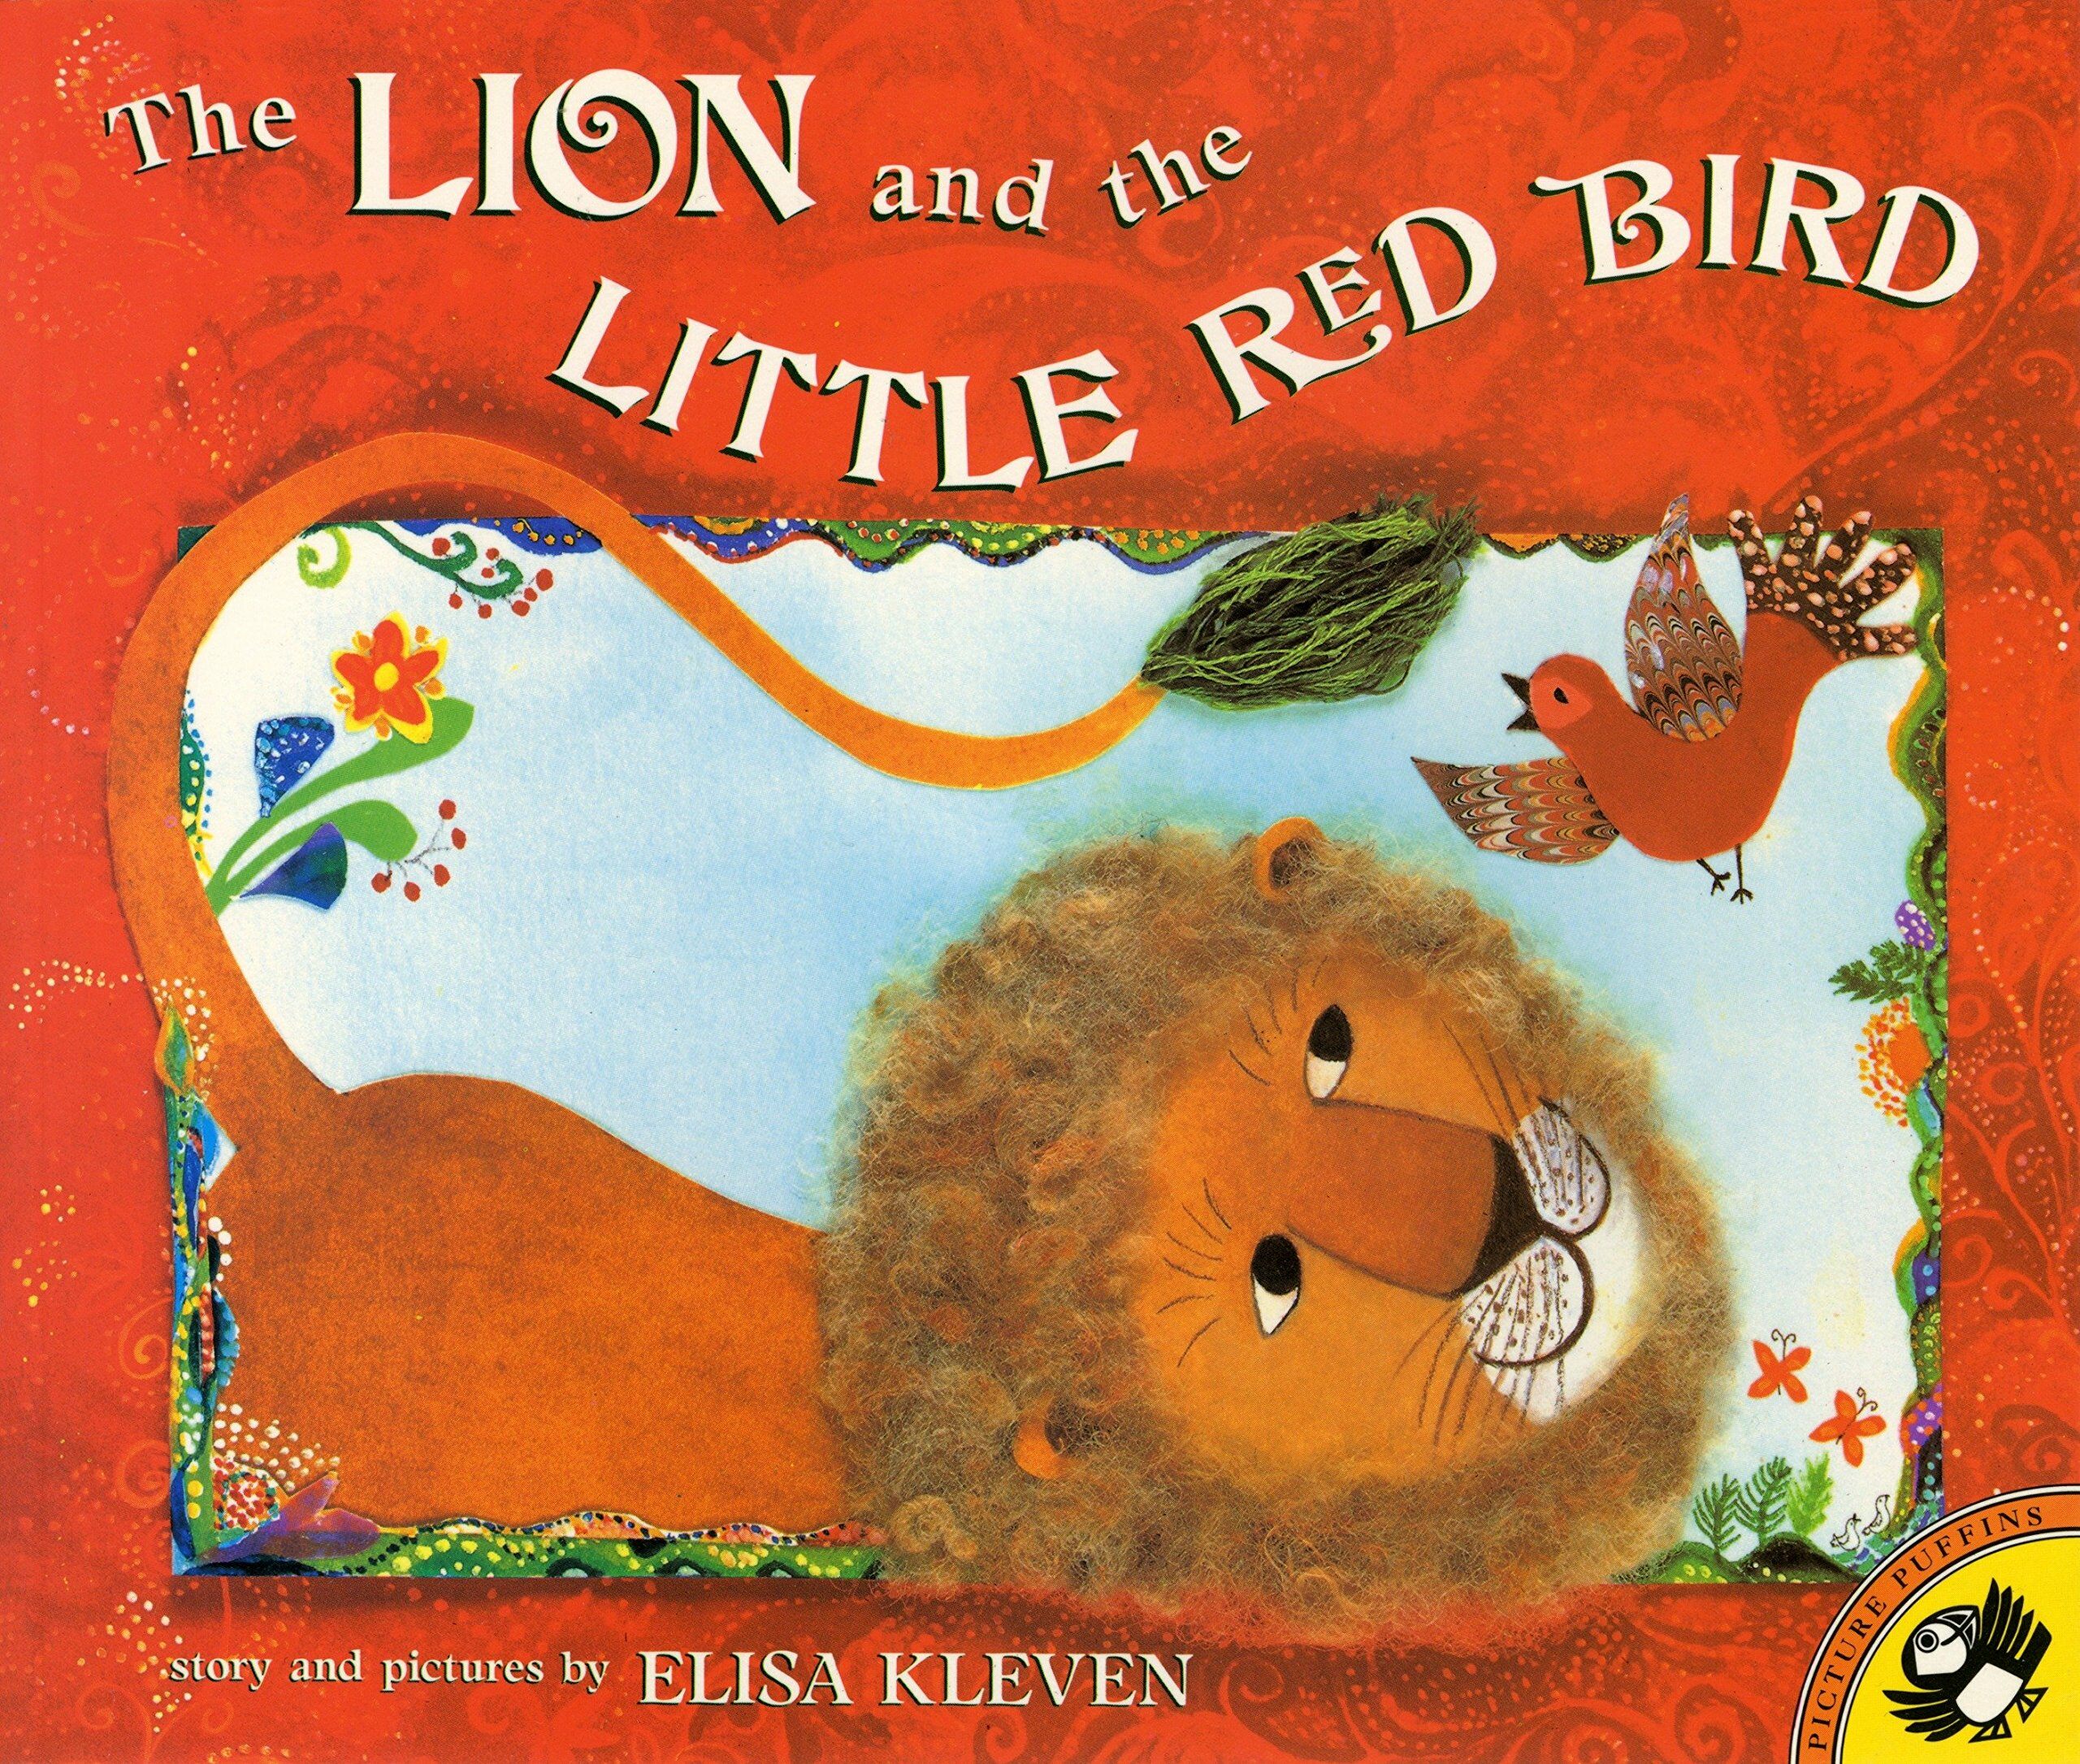 The Lion and the Little Red Bird (Paperback, Reprint)